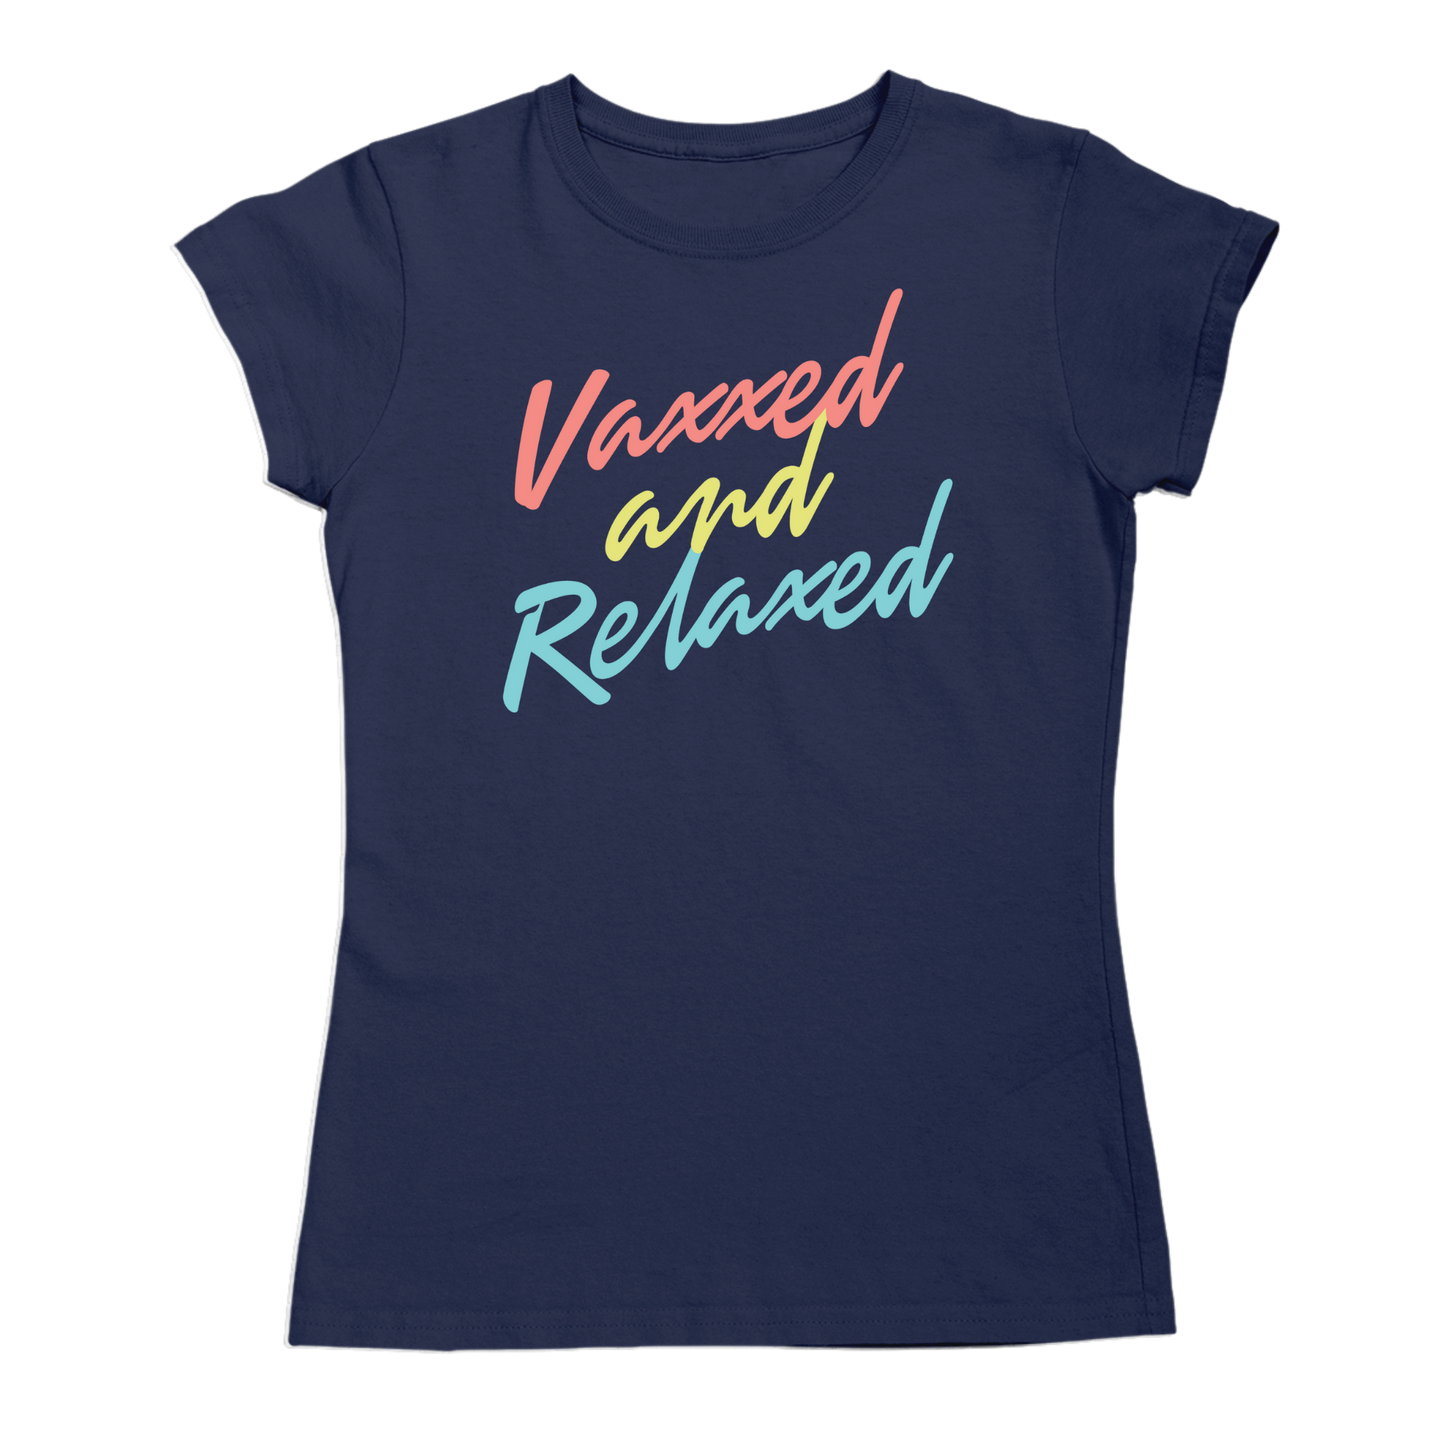 Vaxxed & Relaxed Tee